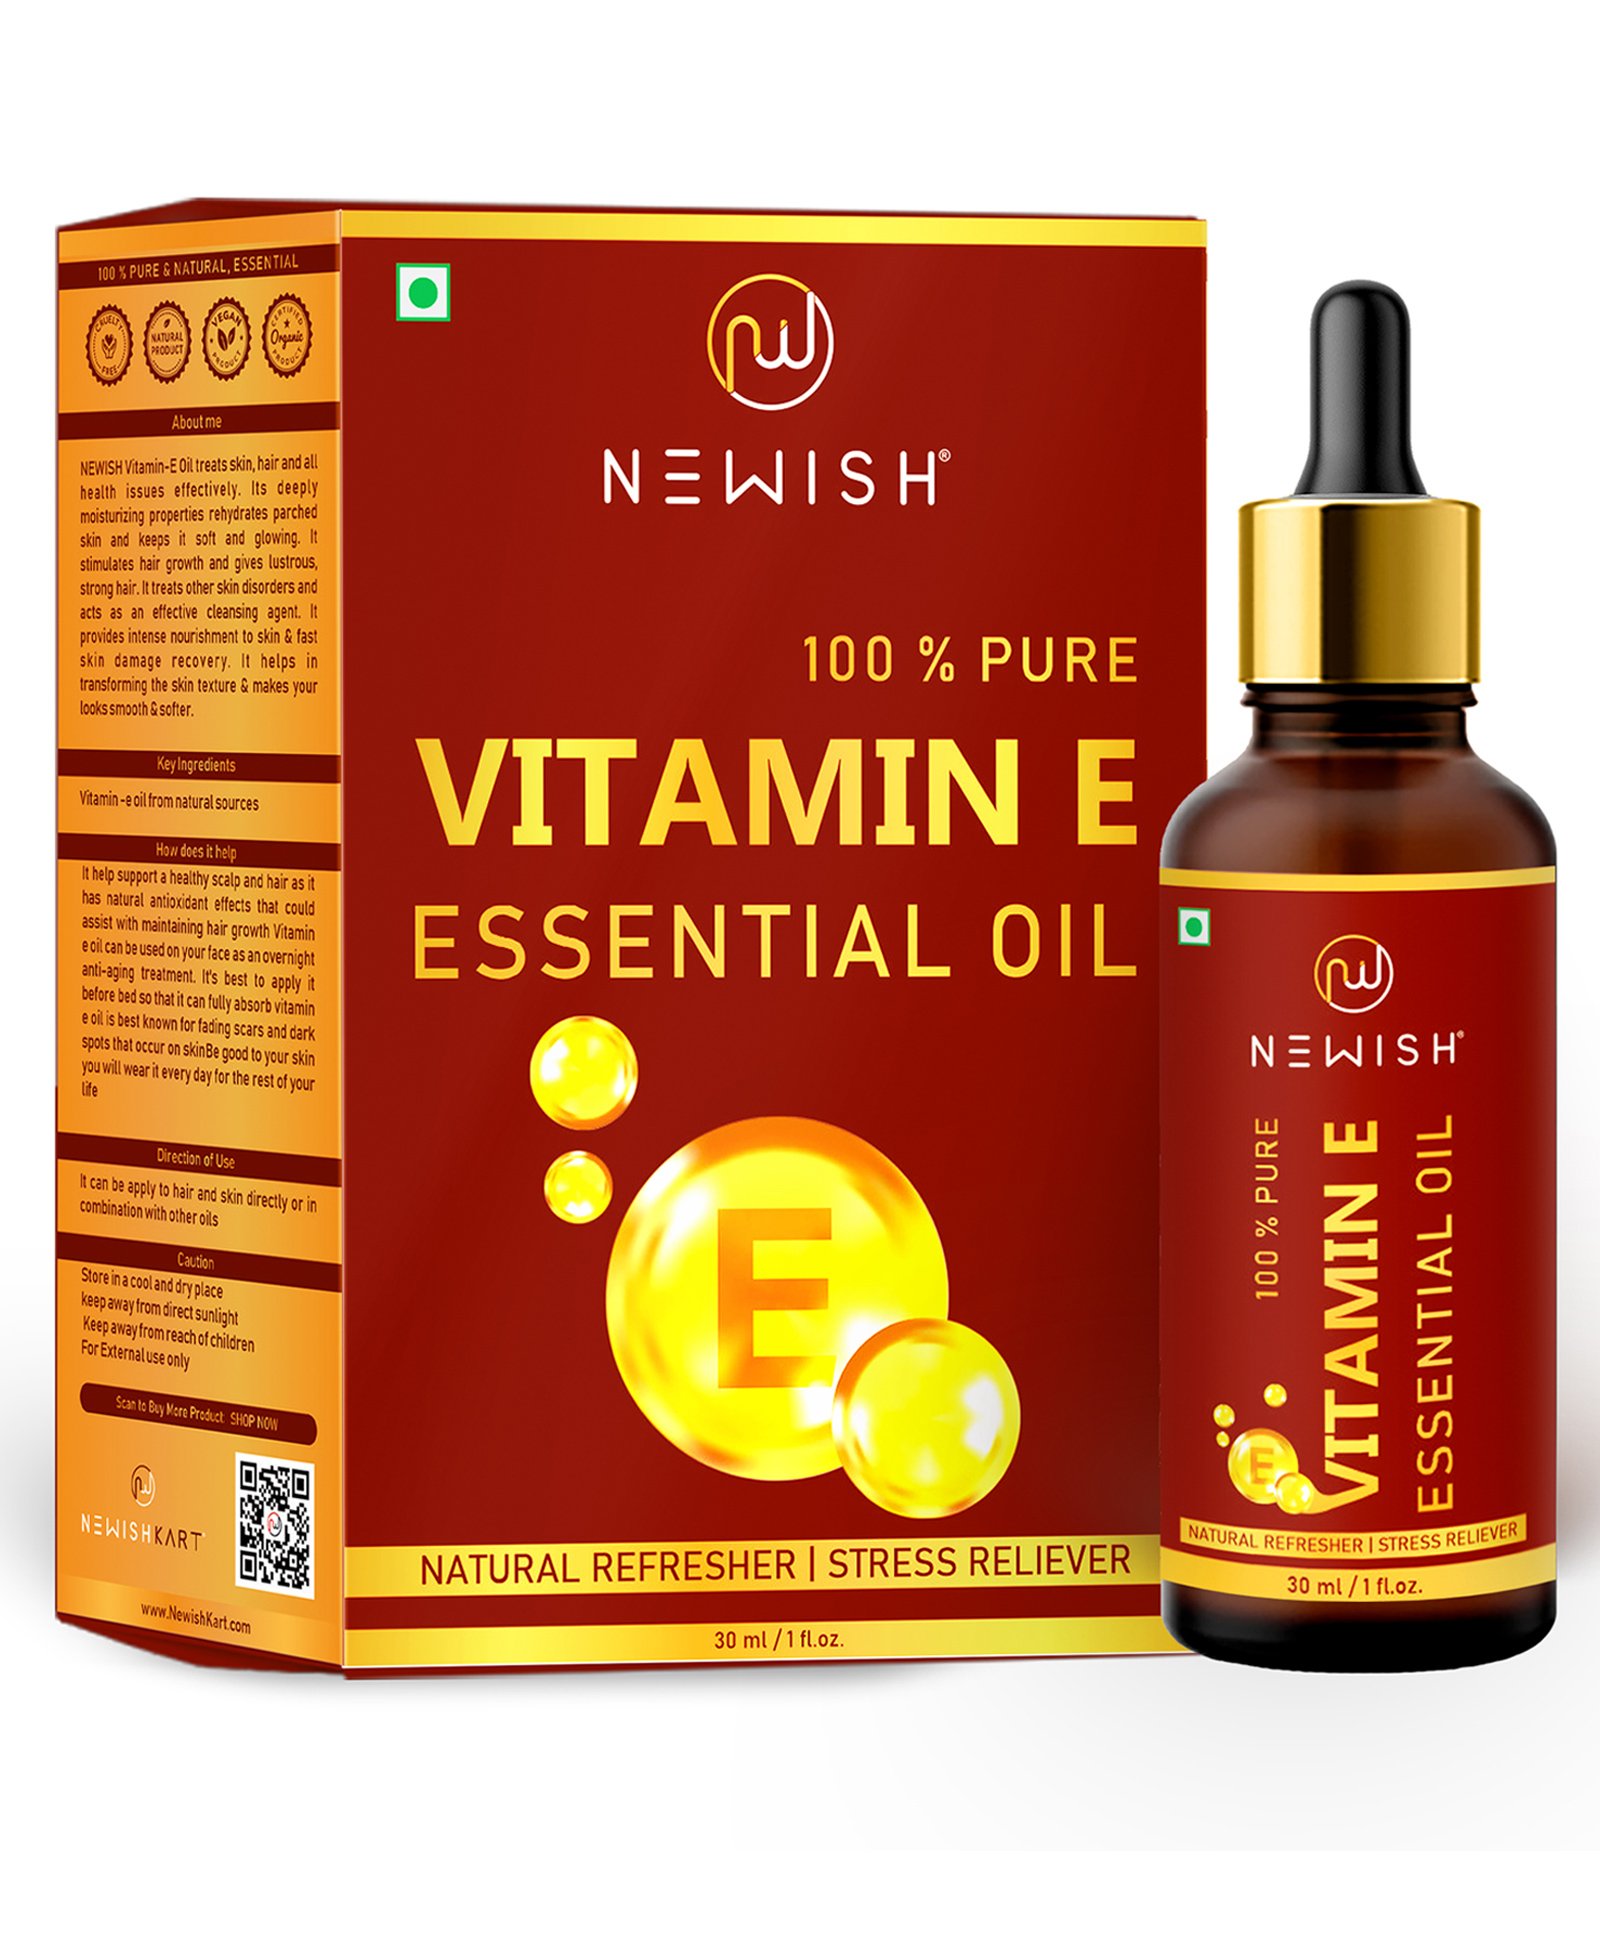 Newish® Vitamin E Oil for Hair Growth, Face, Body, Skin (Non capsule) -  30ml Online in India, Buy at Best Price from FirstCry.com - 8801044